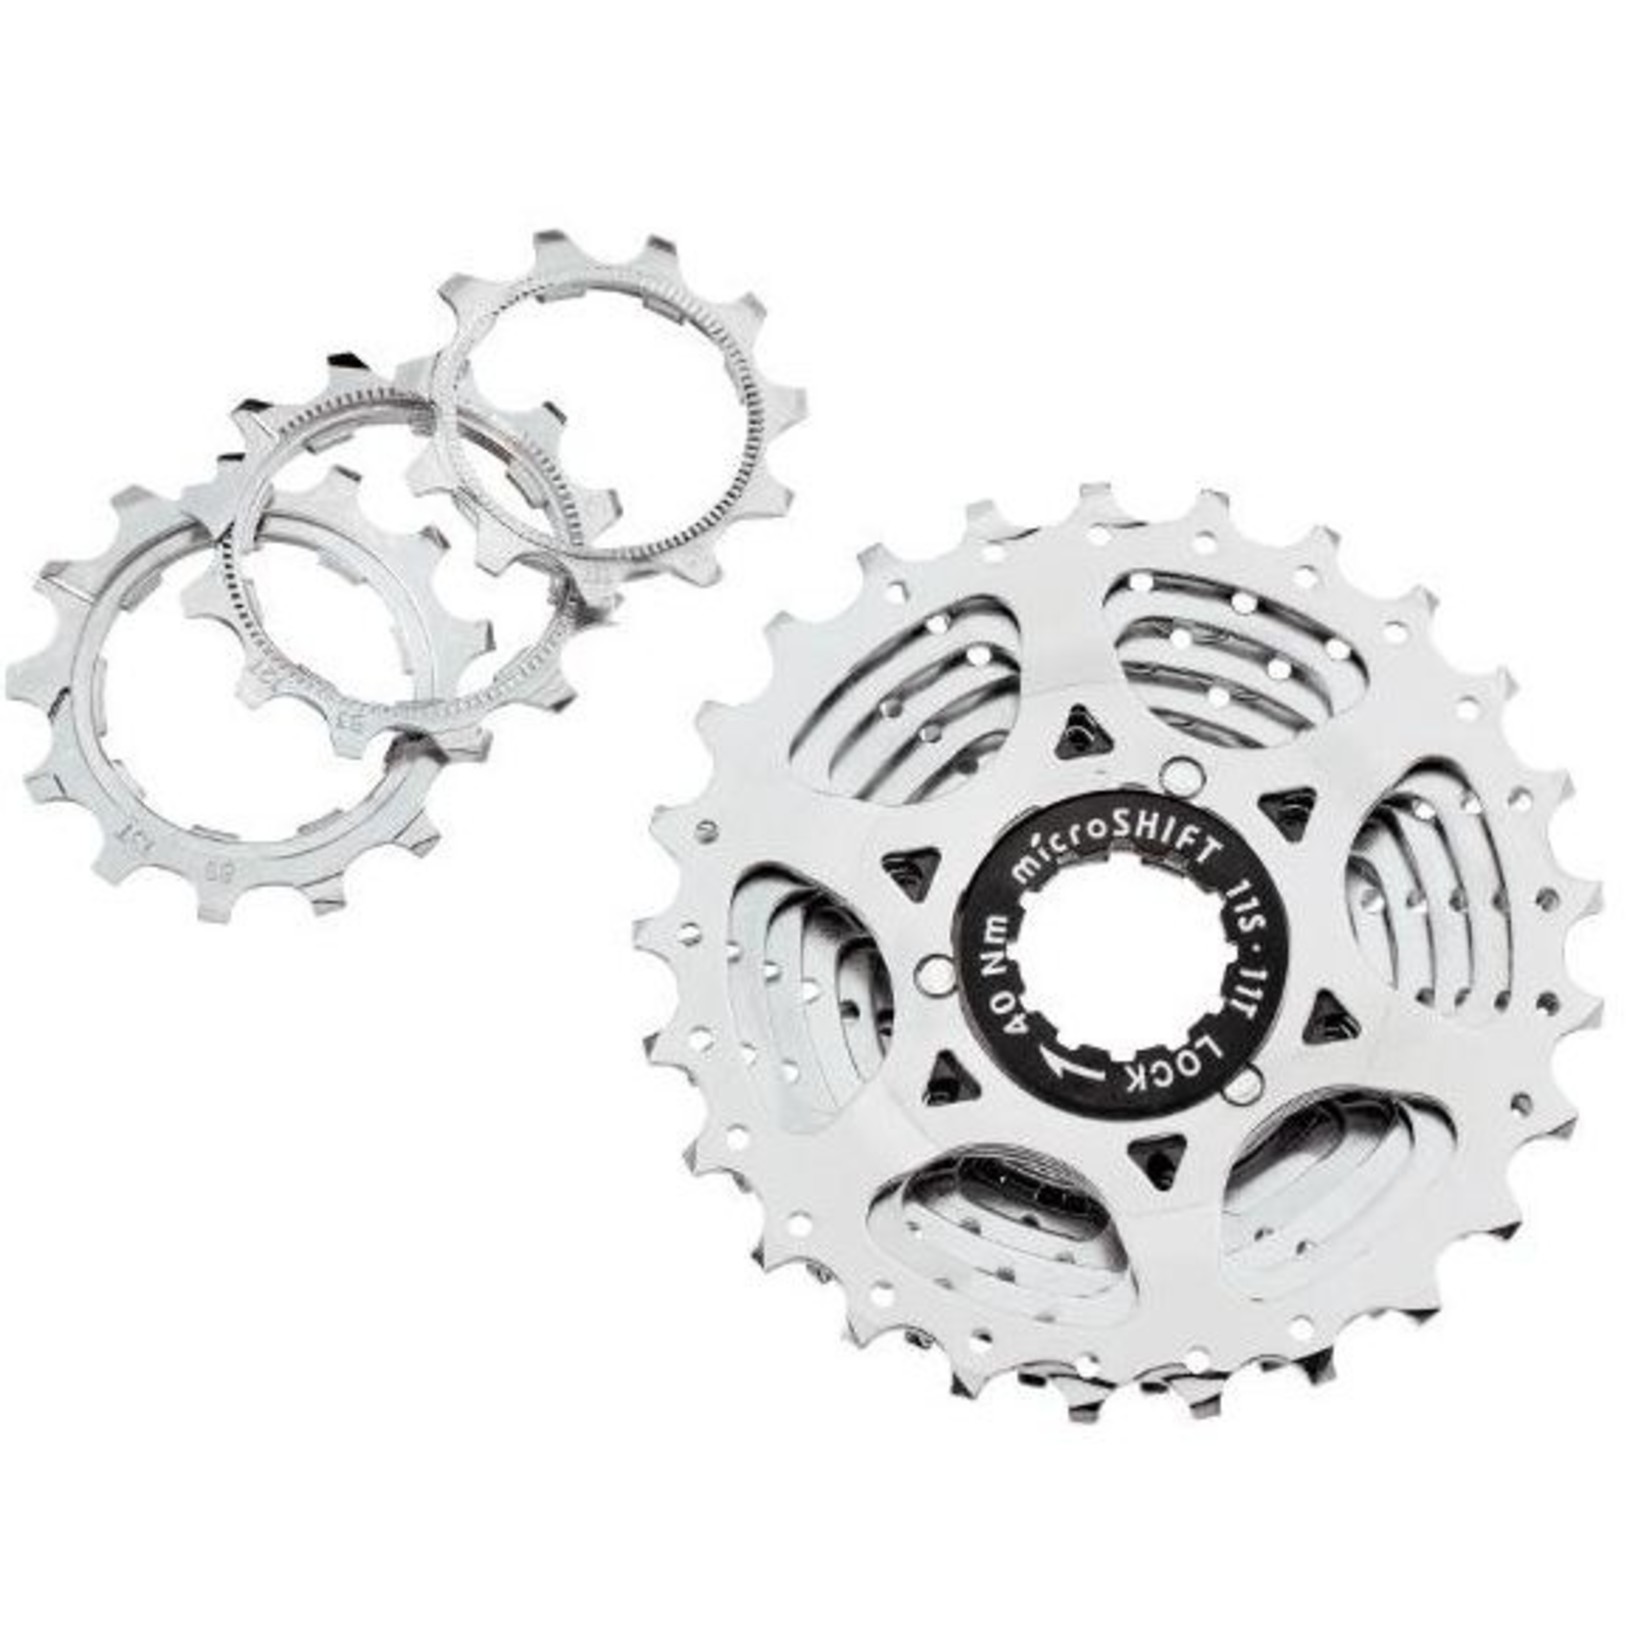 Microshift Microshift Bicycle Cassette - 11 Speed - 11-25T - Road